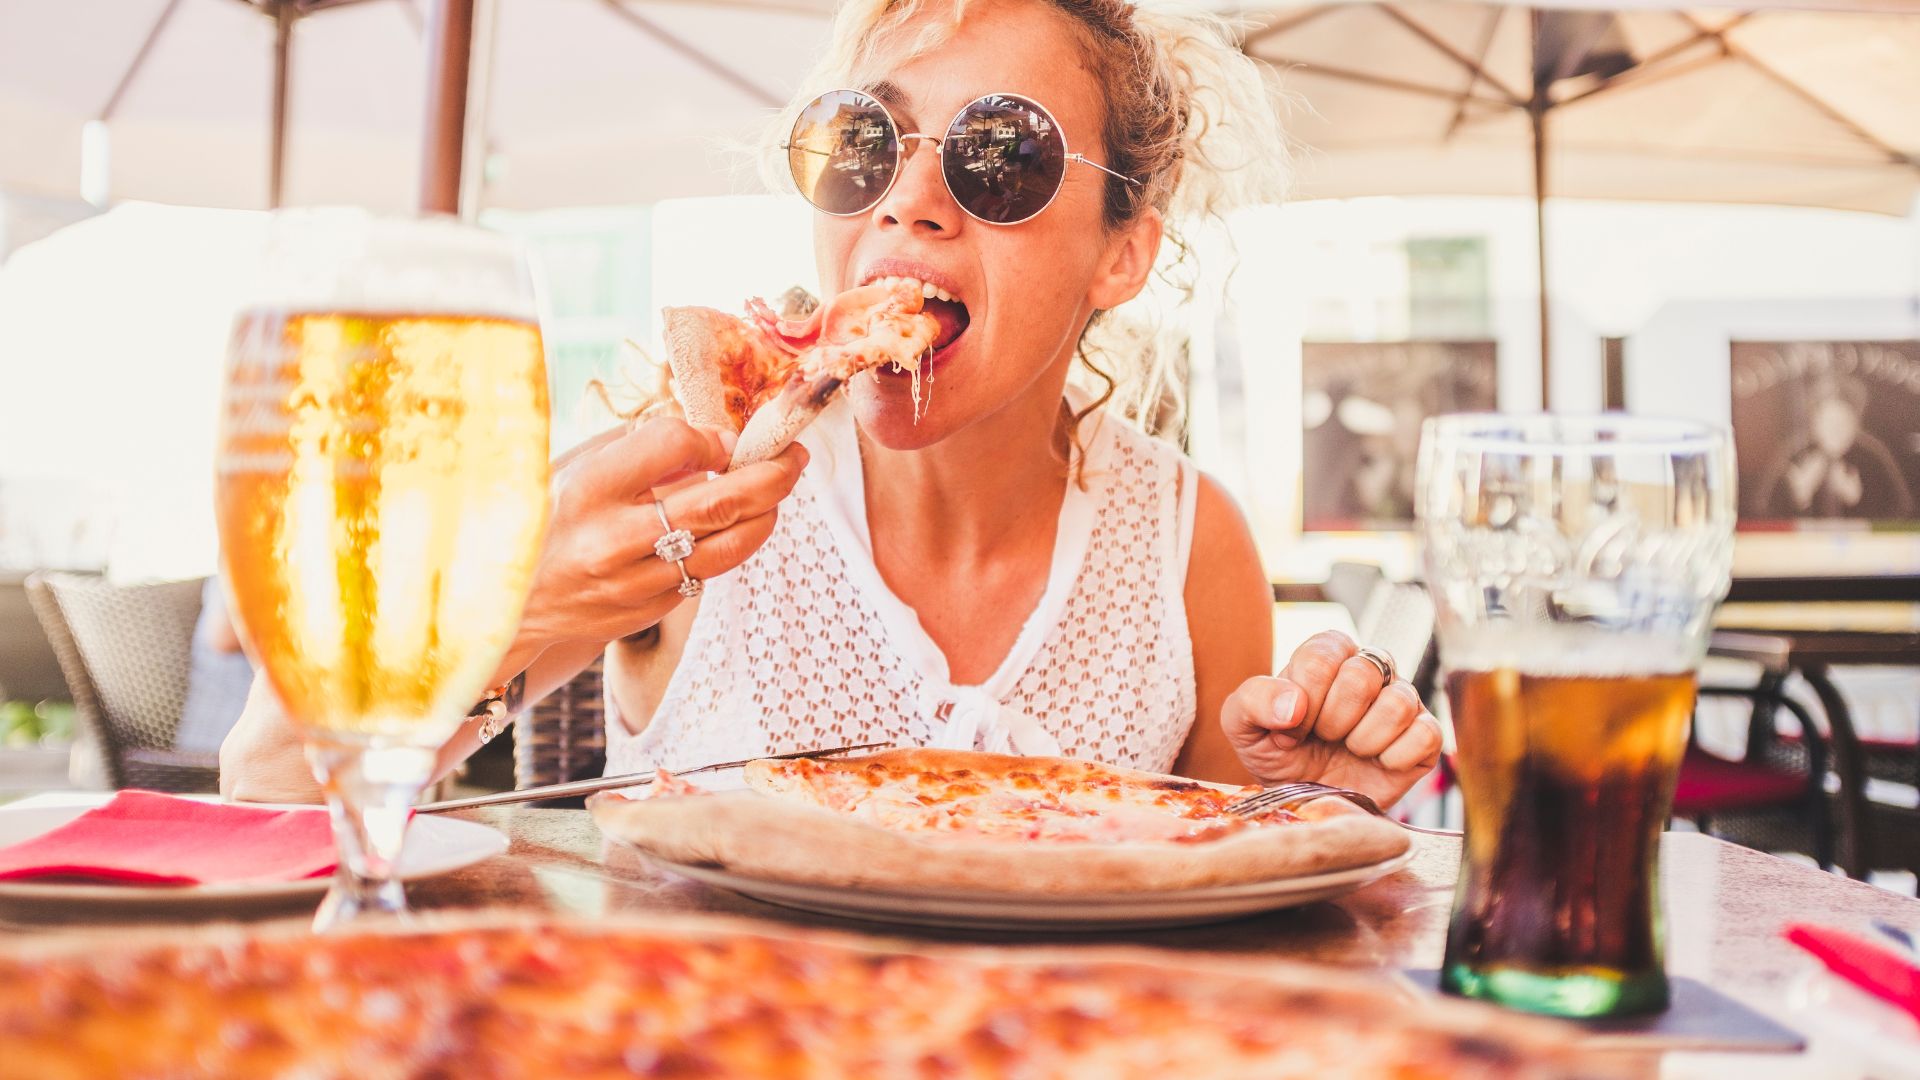 A woman at a casual dining restaurant eating a pizza